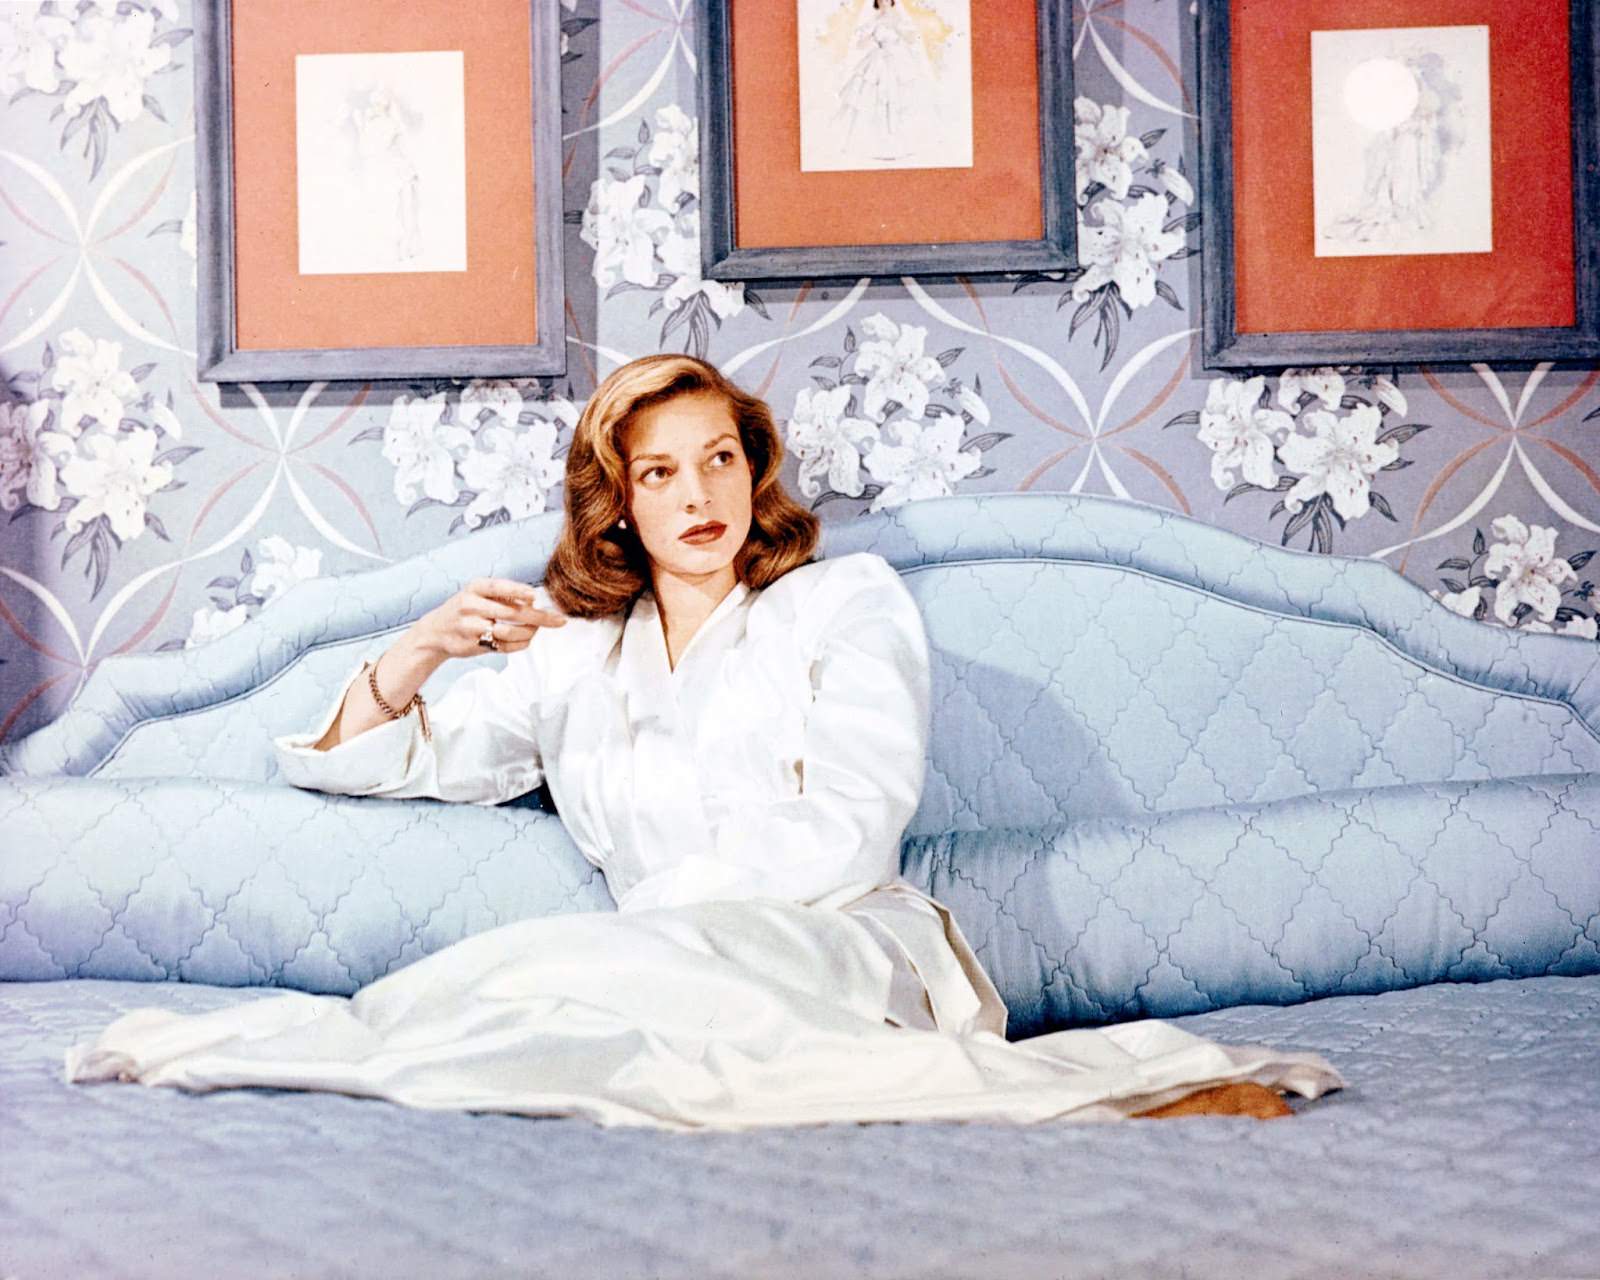 Sophisticated lounging-at-home style, circa 1950.